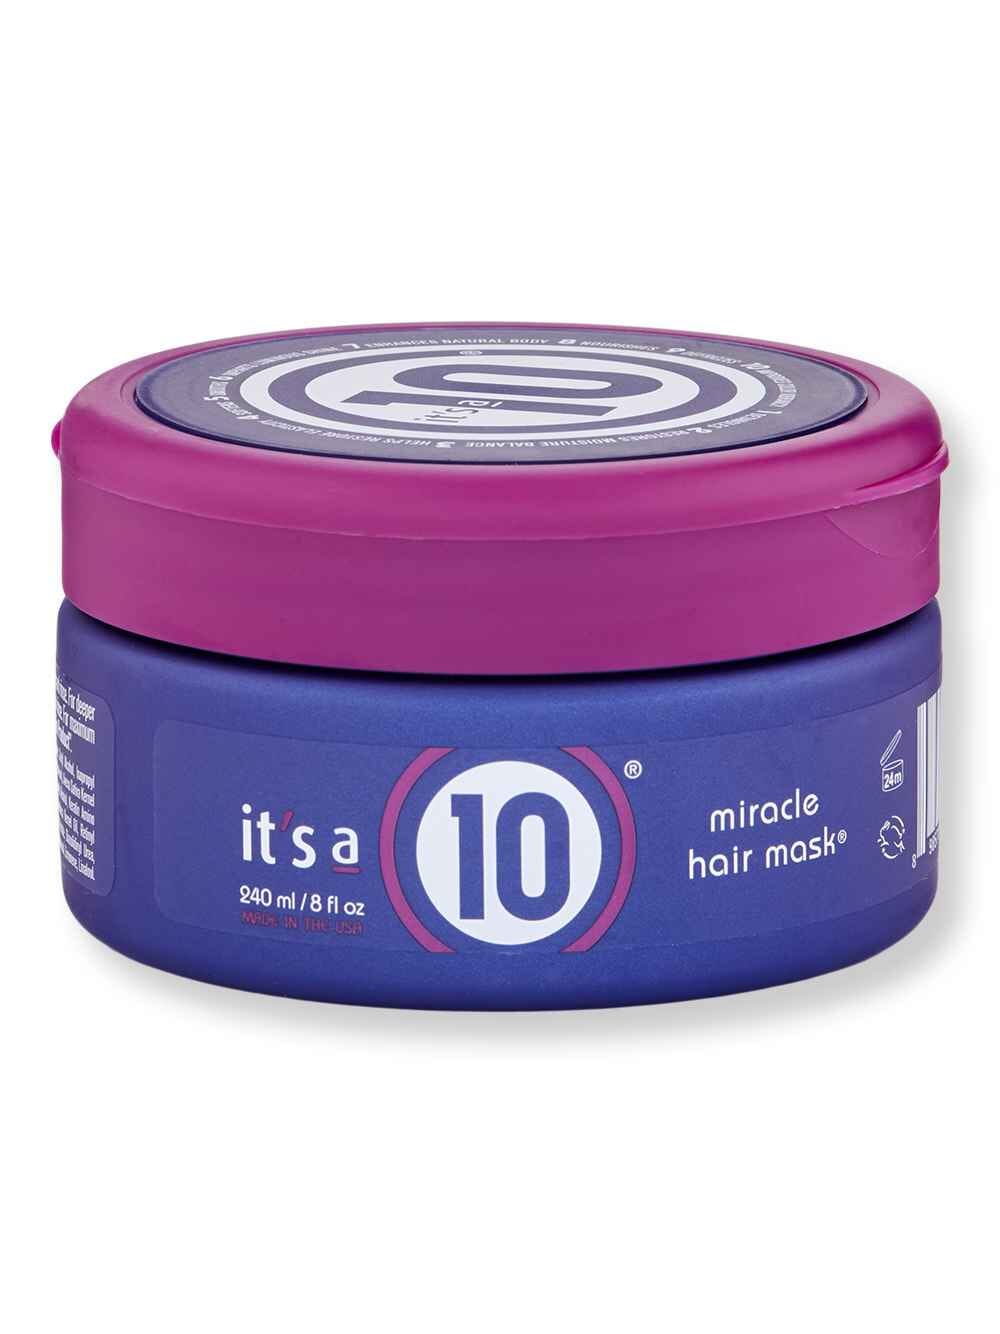 It's A 10 It's A 10 Miracle Hair Mask 8 oz240 ml Hair Masques 